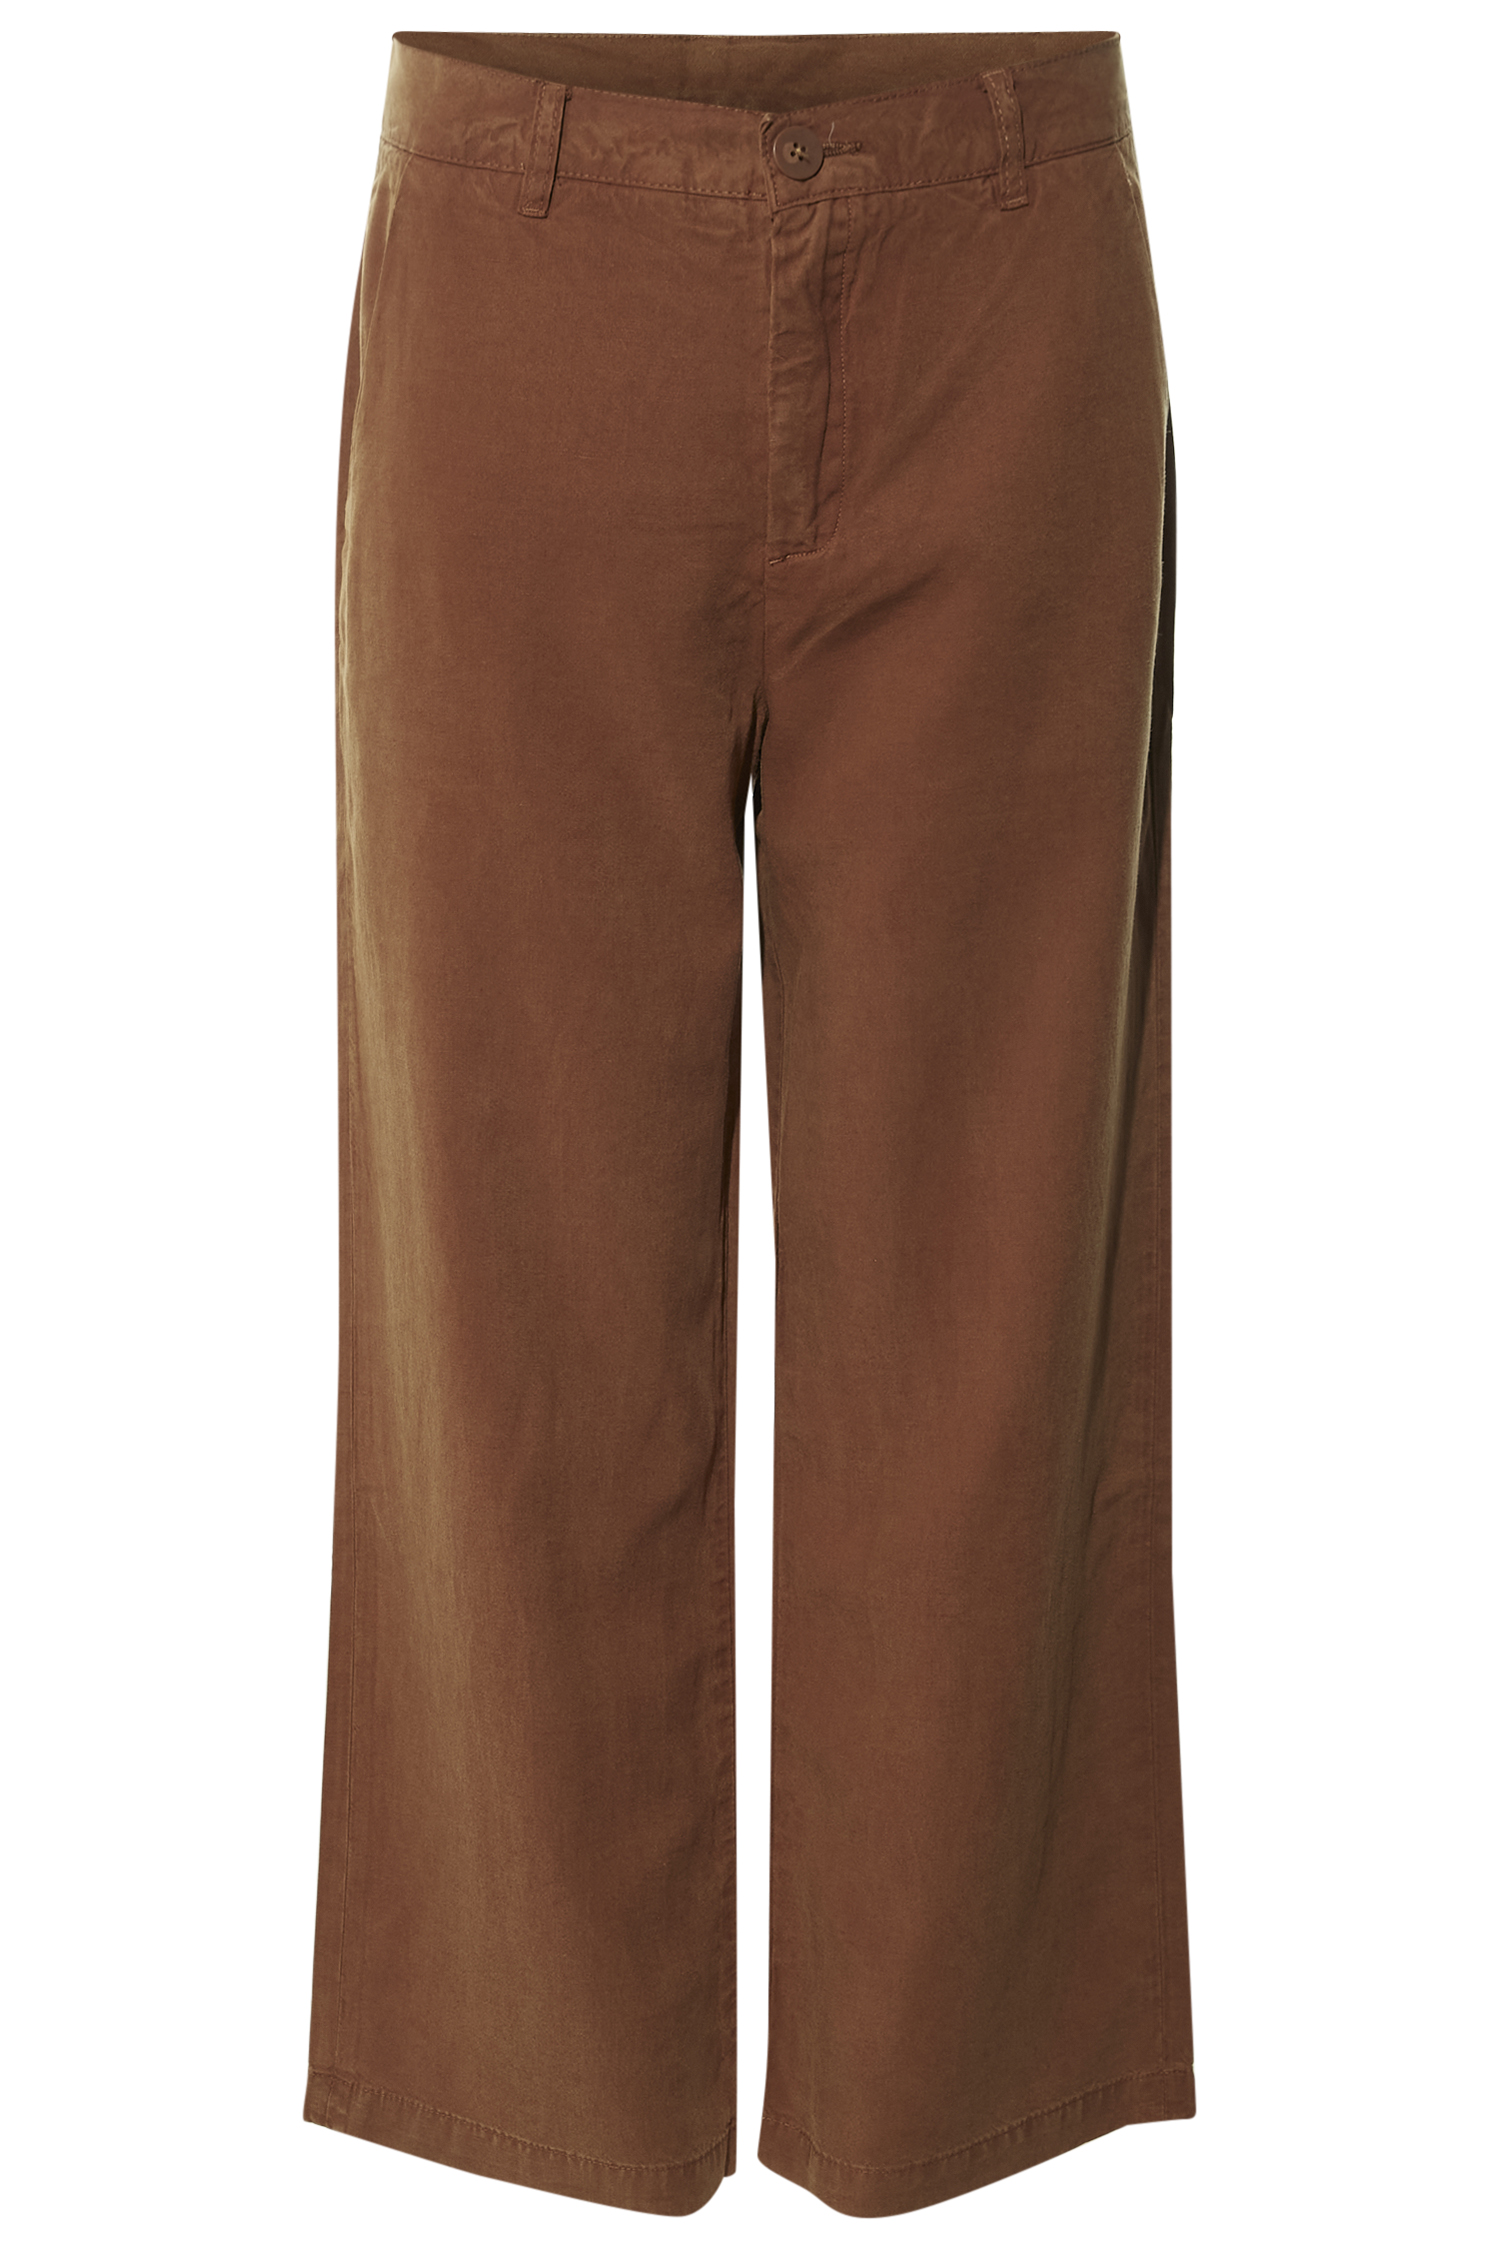 KUT from the Kloth Crop Wide Leg Trousers